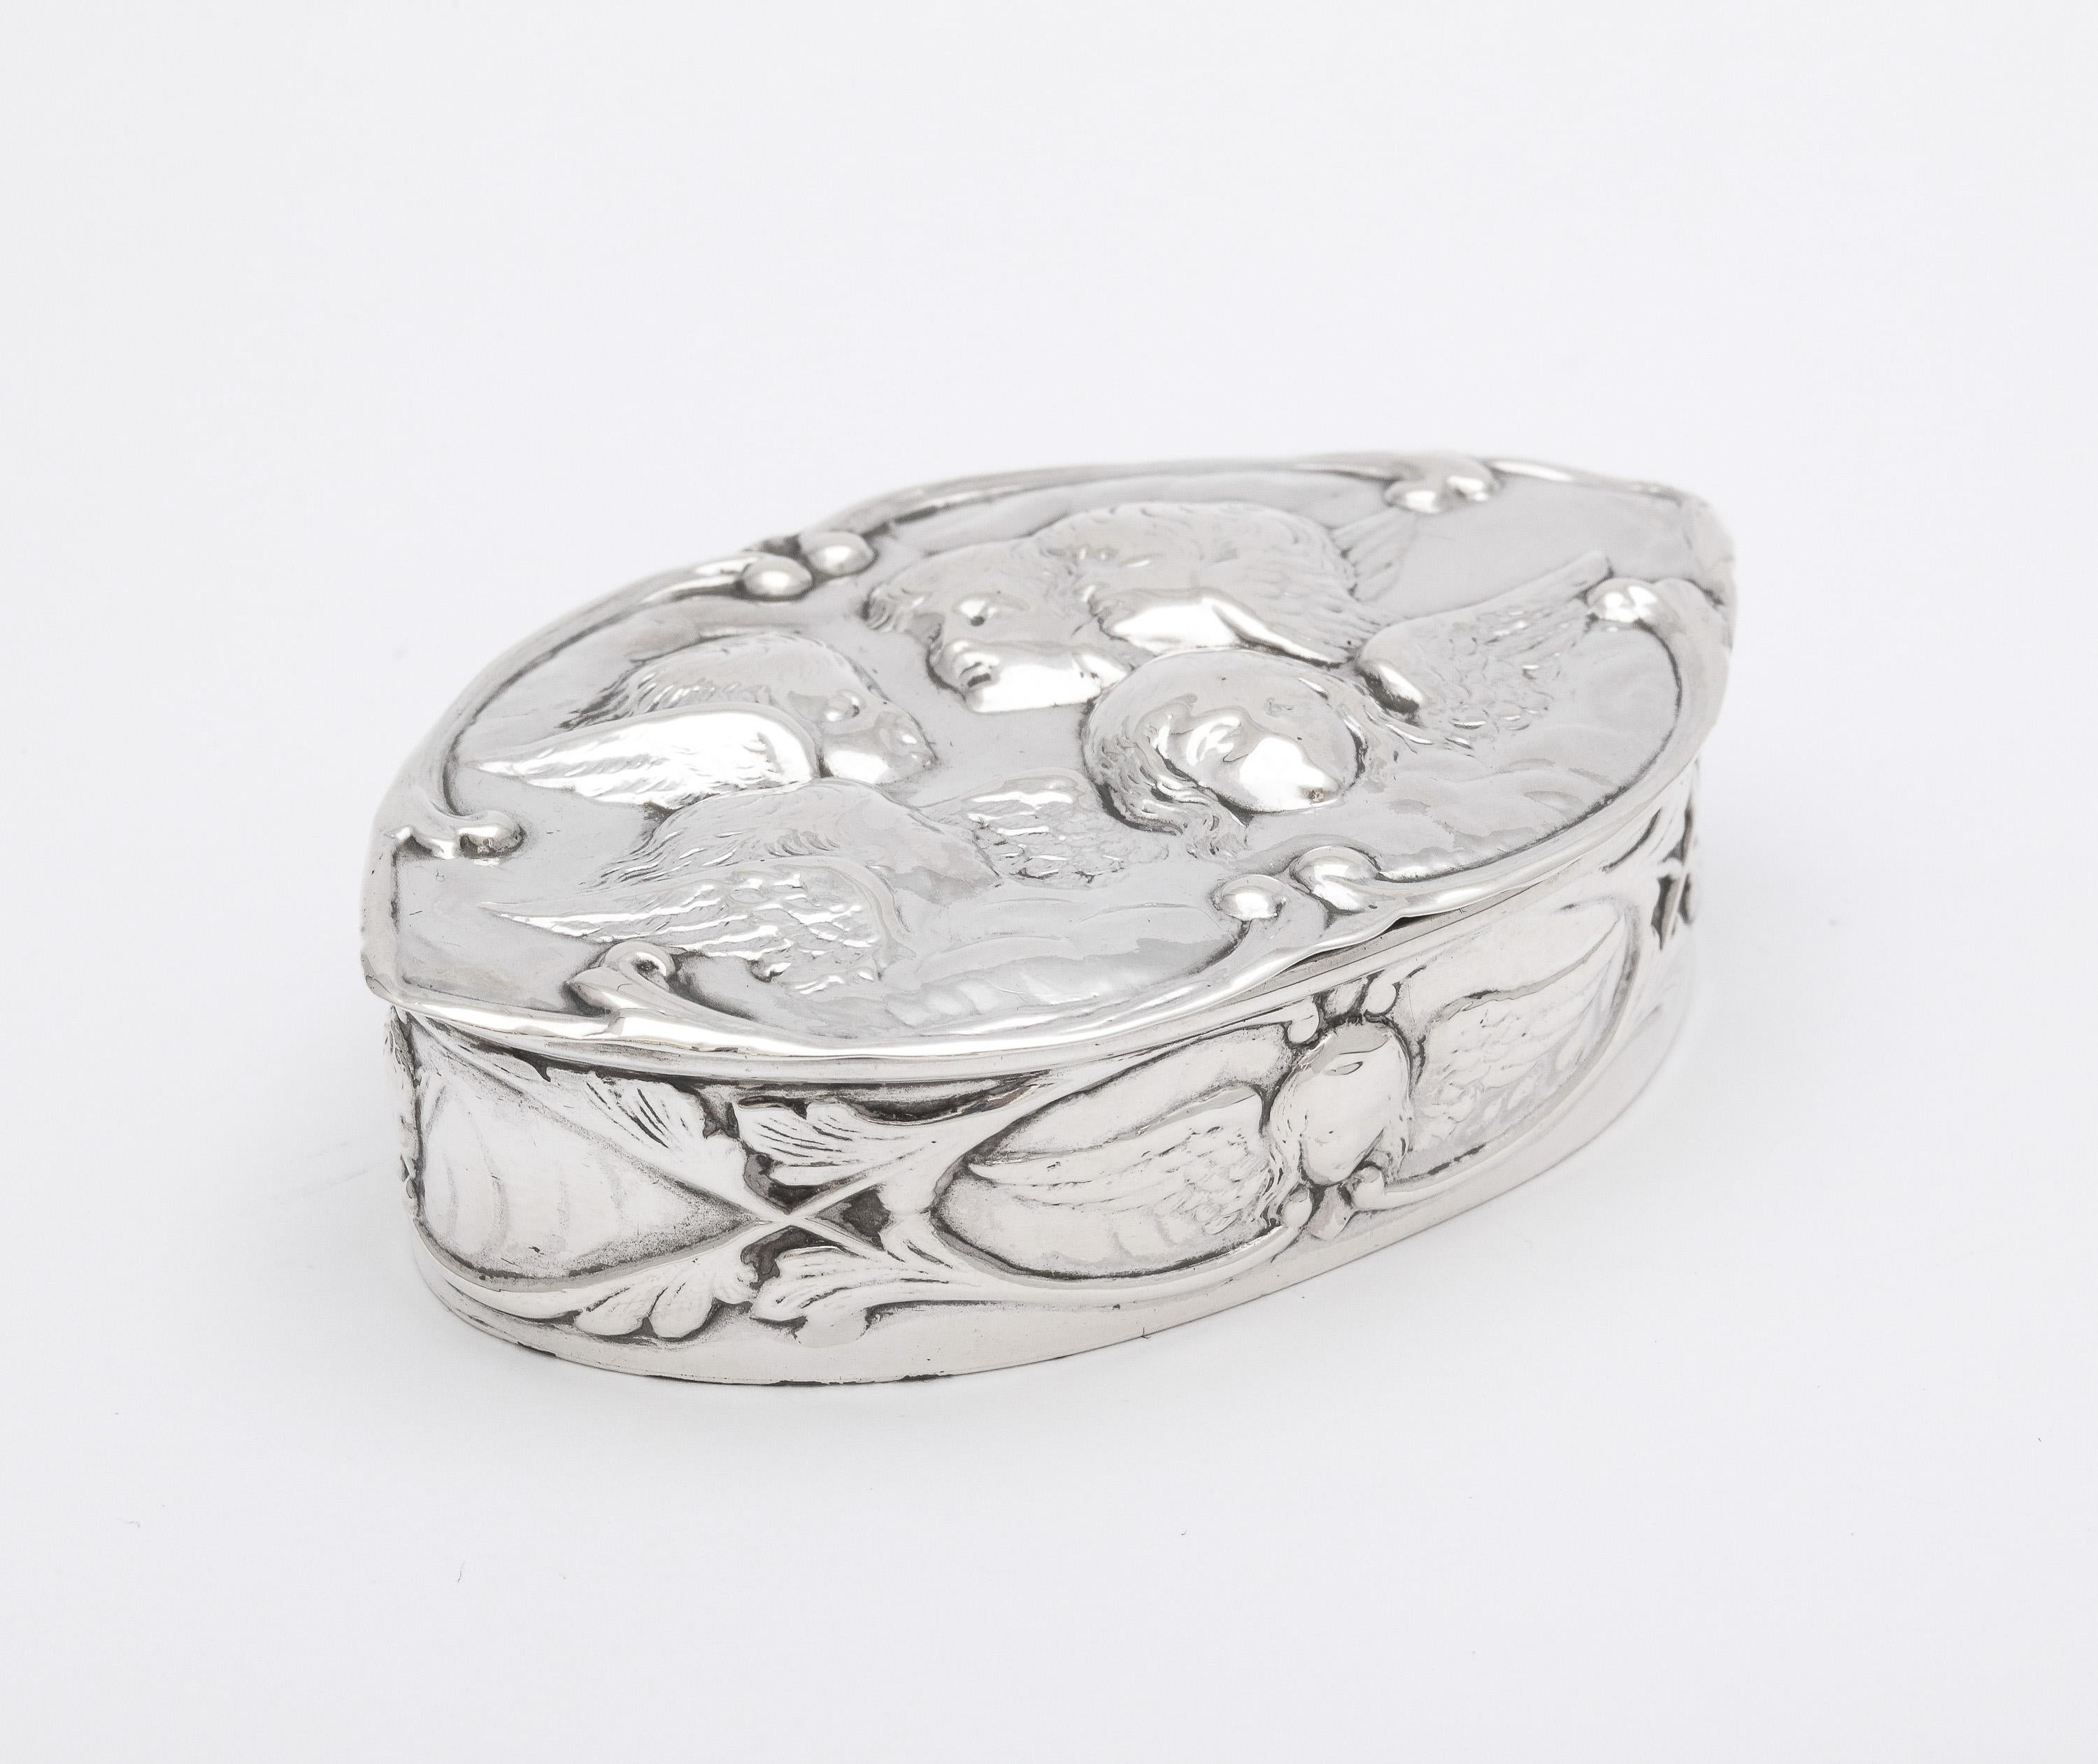 English Victorian Period Sterling Silver Trinkets Box With Hinged Lid by William Comyns